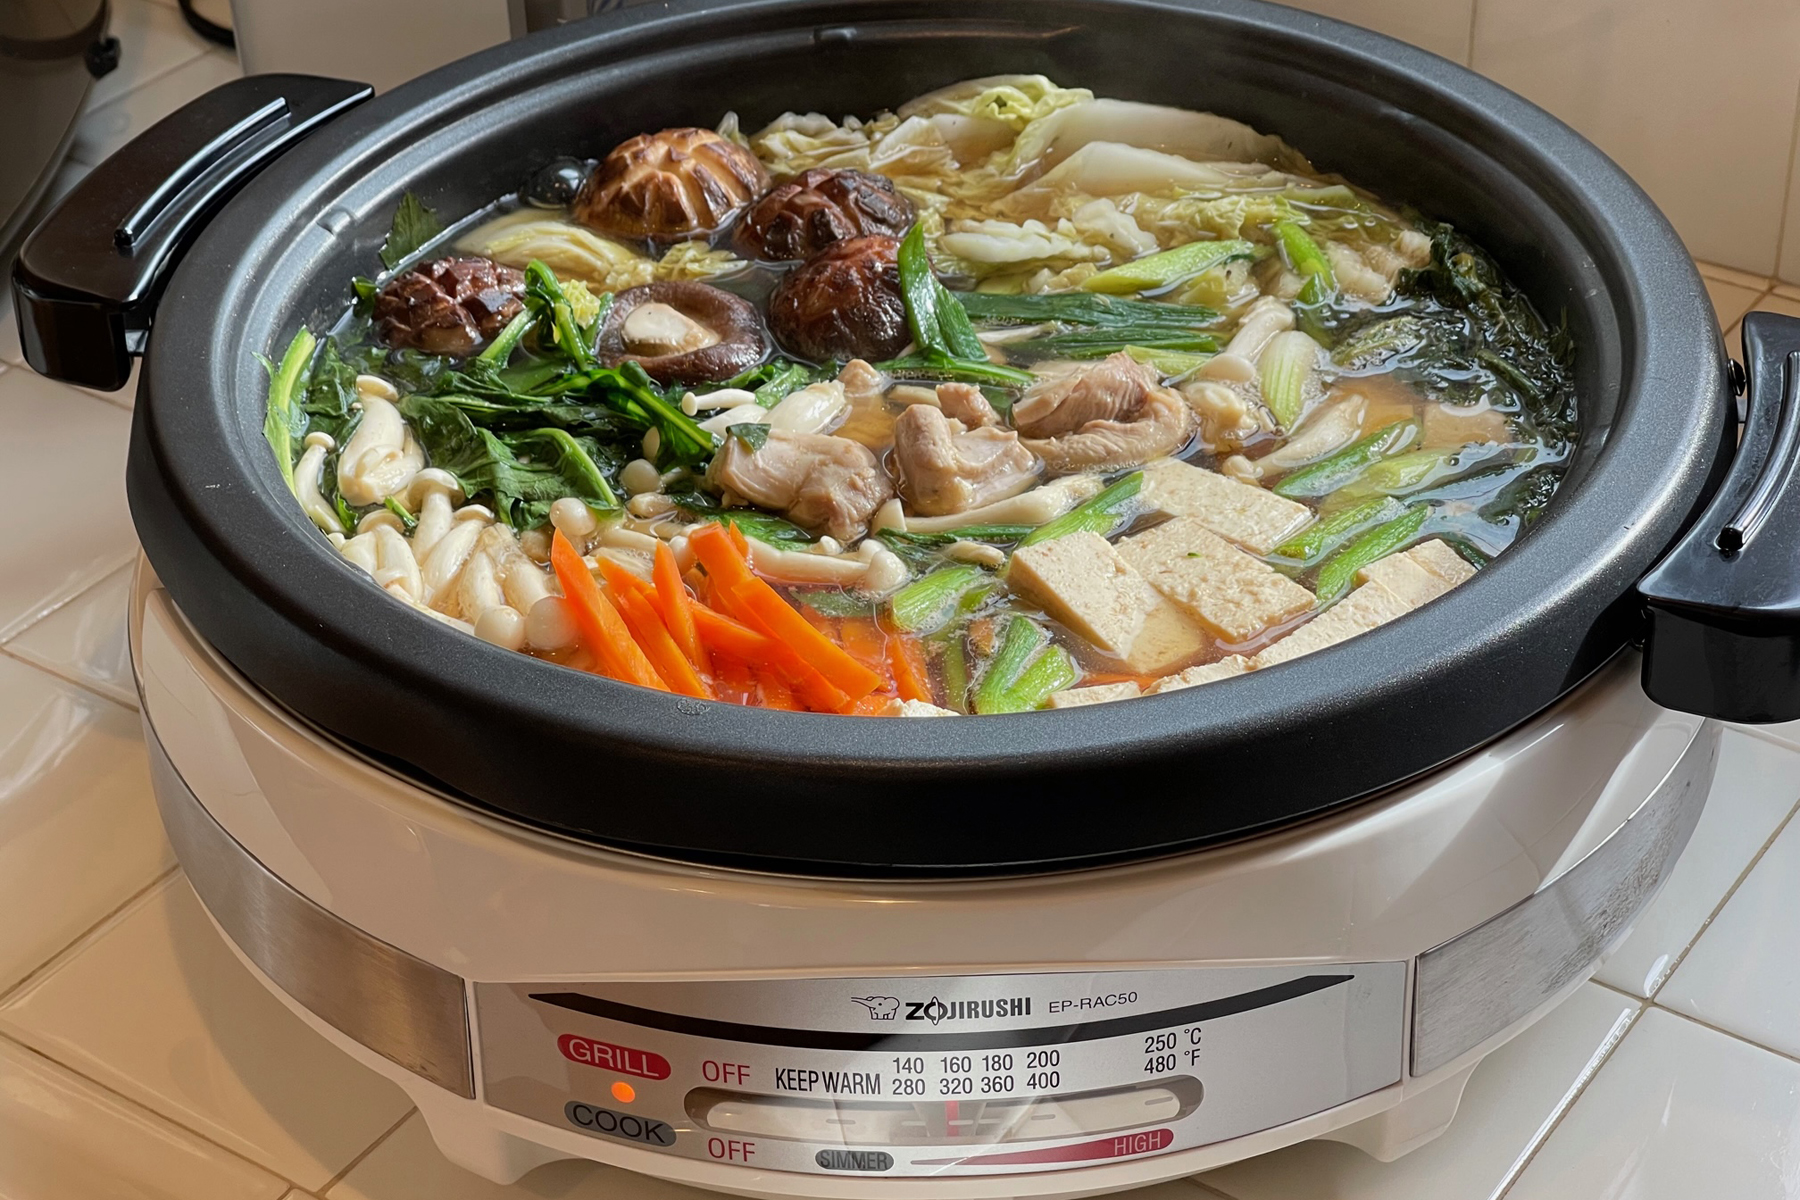 It's easy to cook with the EP-RAC50 Electric Skillet